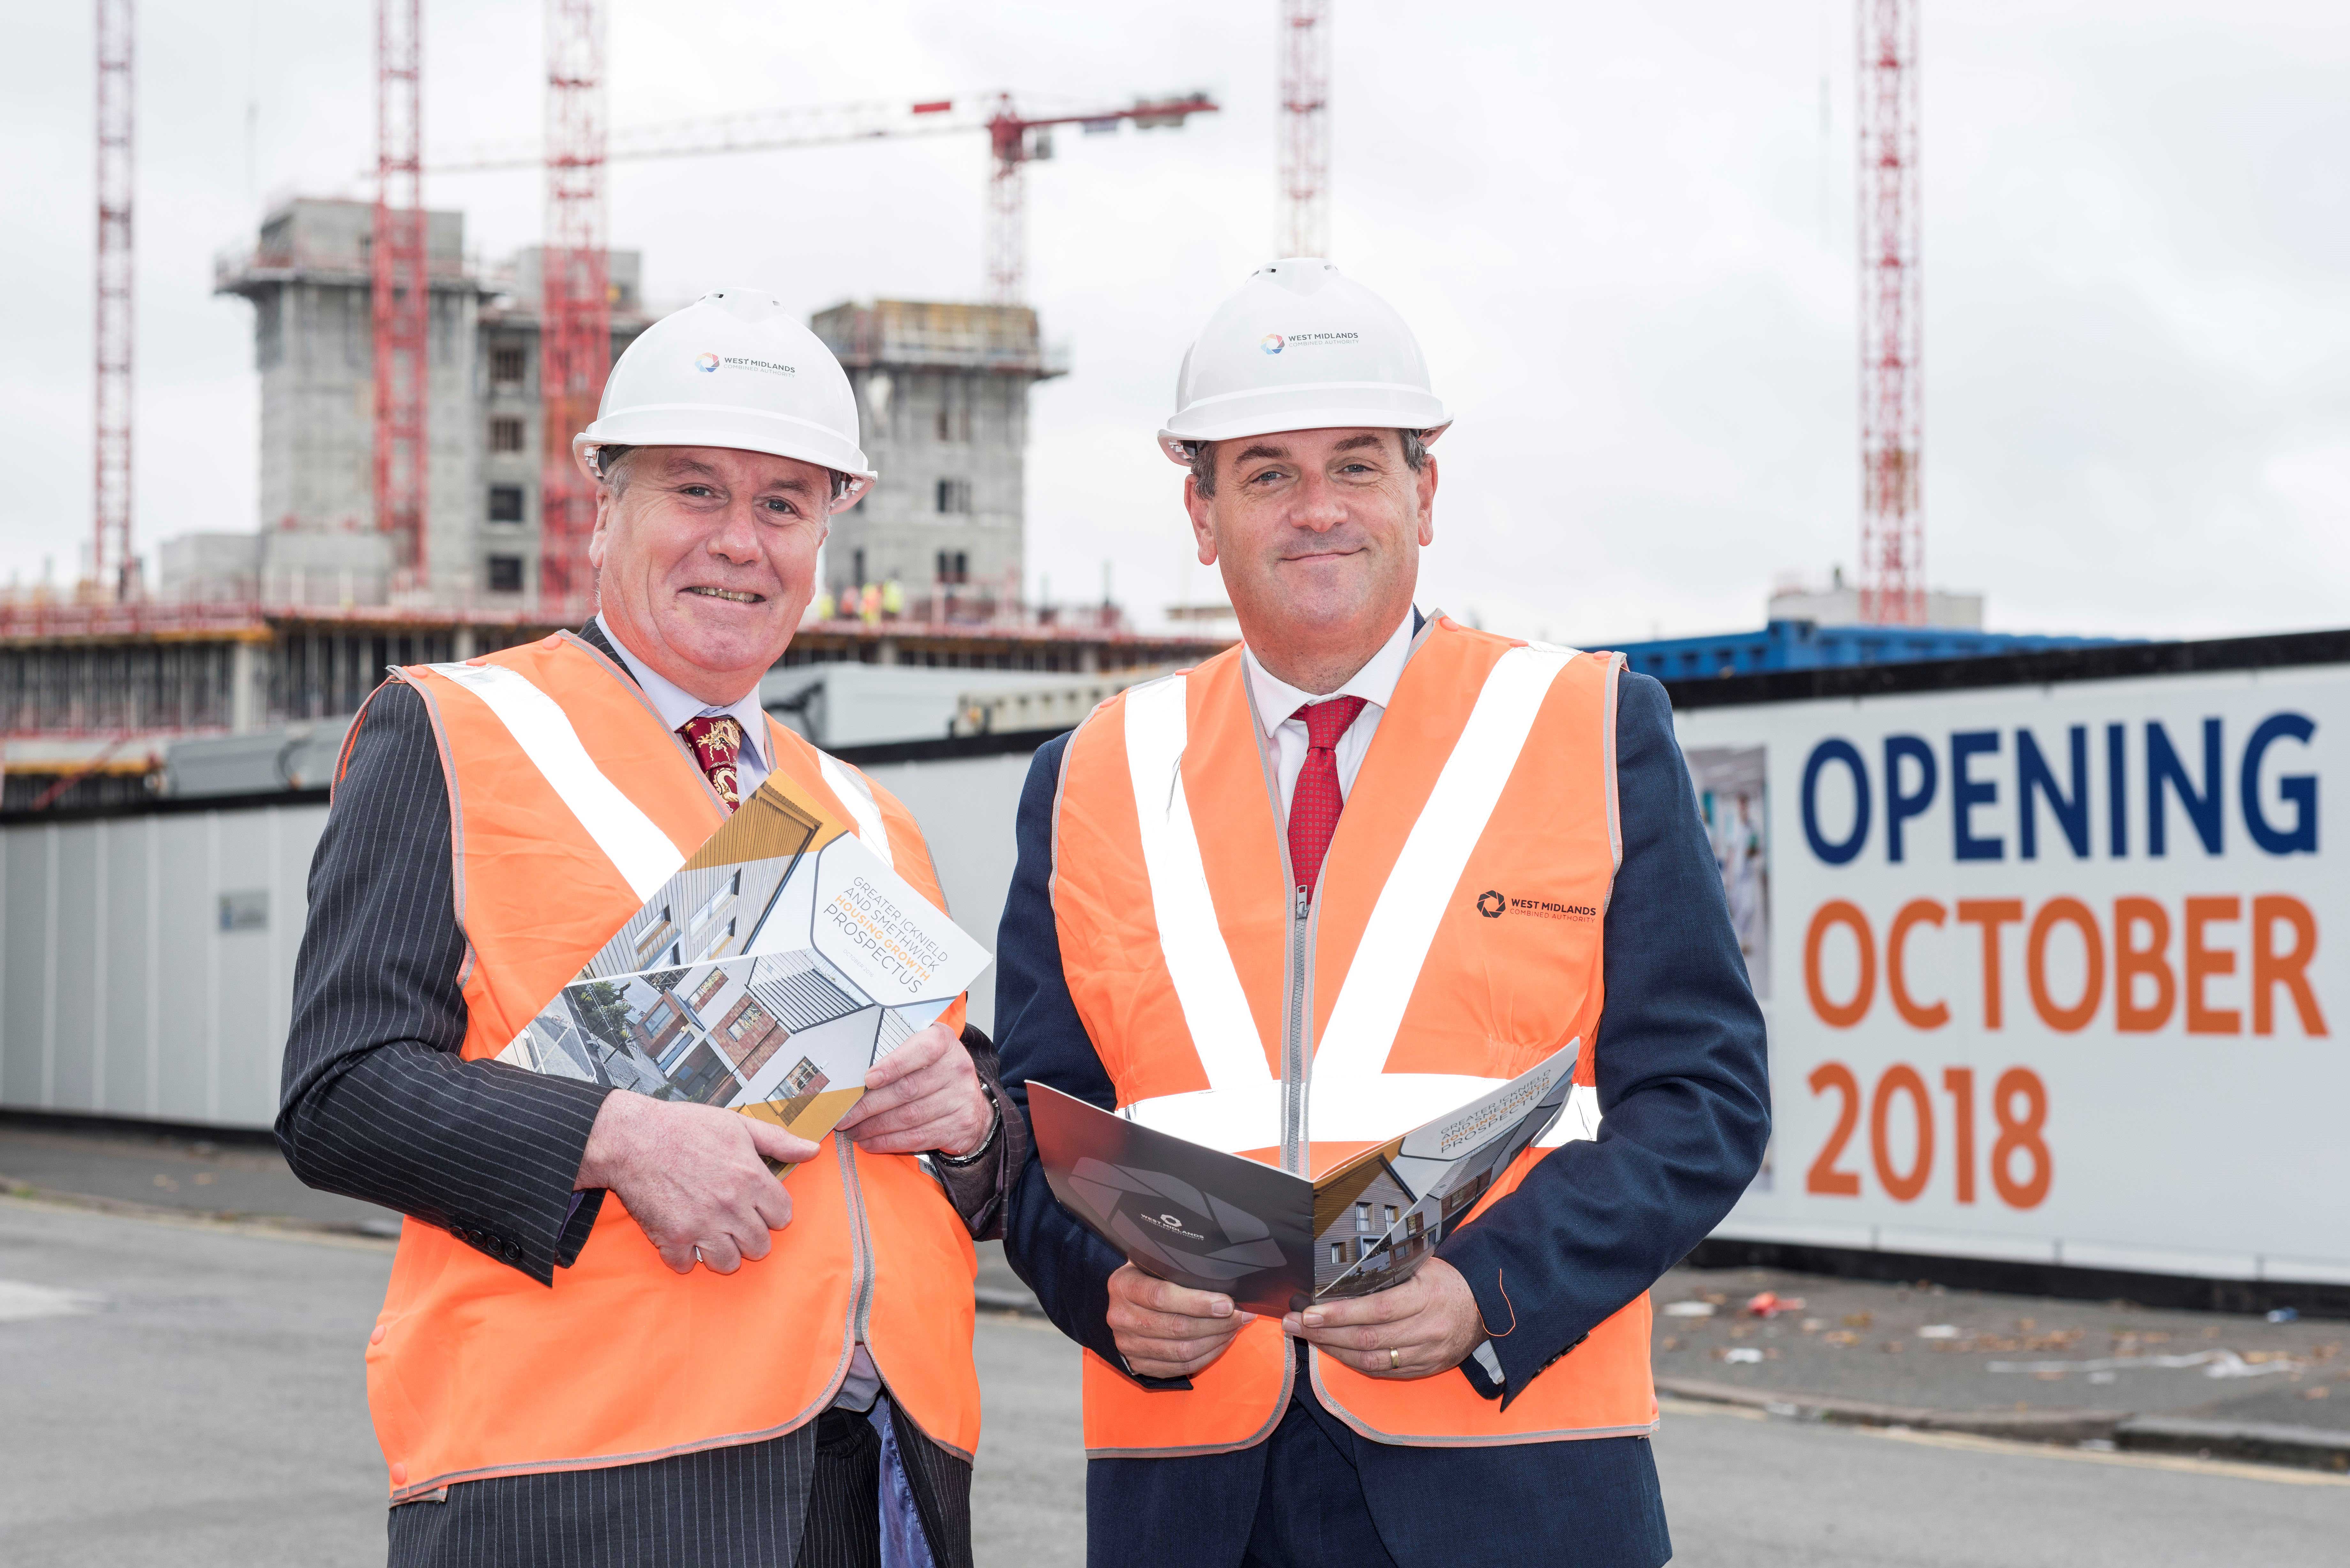 Cllr Steve Eling, left and Cllr John Clancy outside the new Midland Metropolitan Hospital, part of the Grove Lane housing scheme.